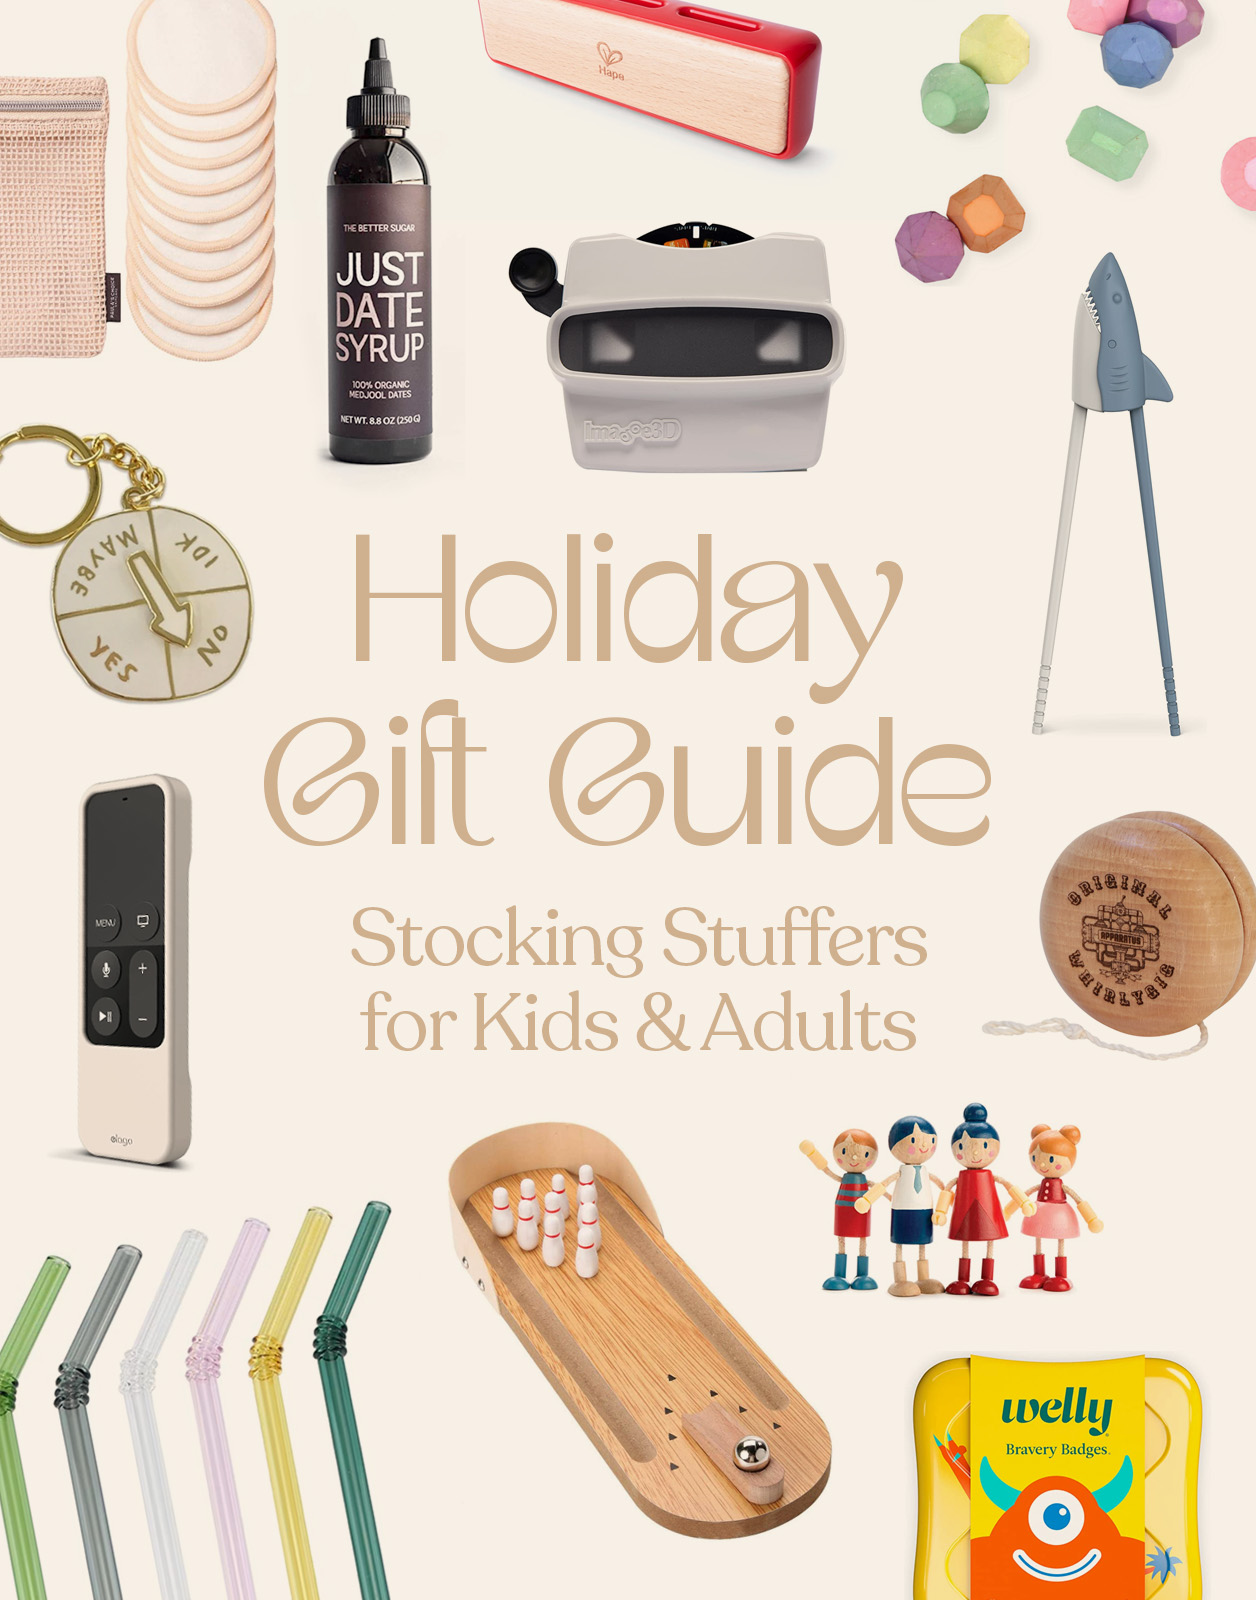 Gifting Guide